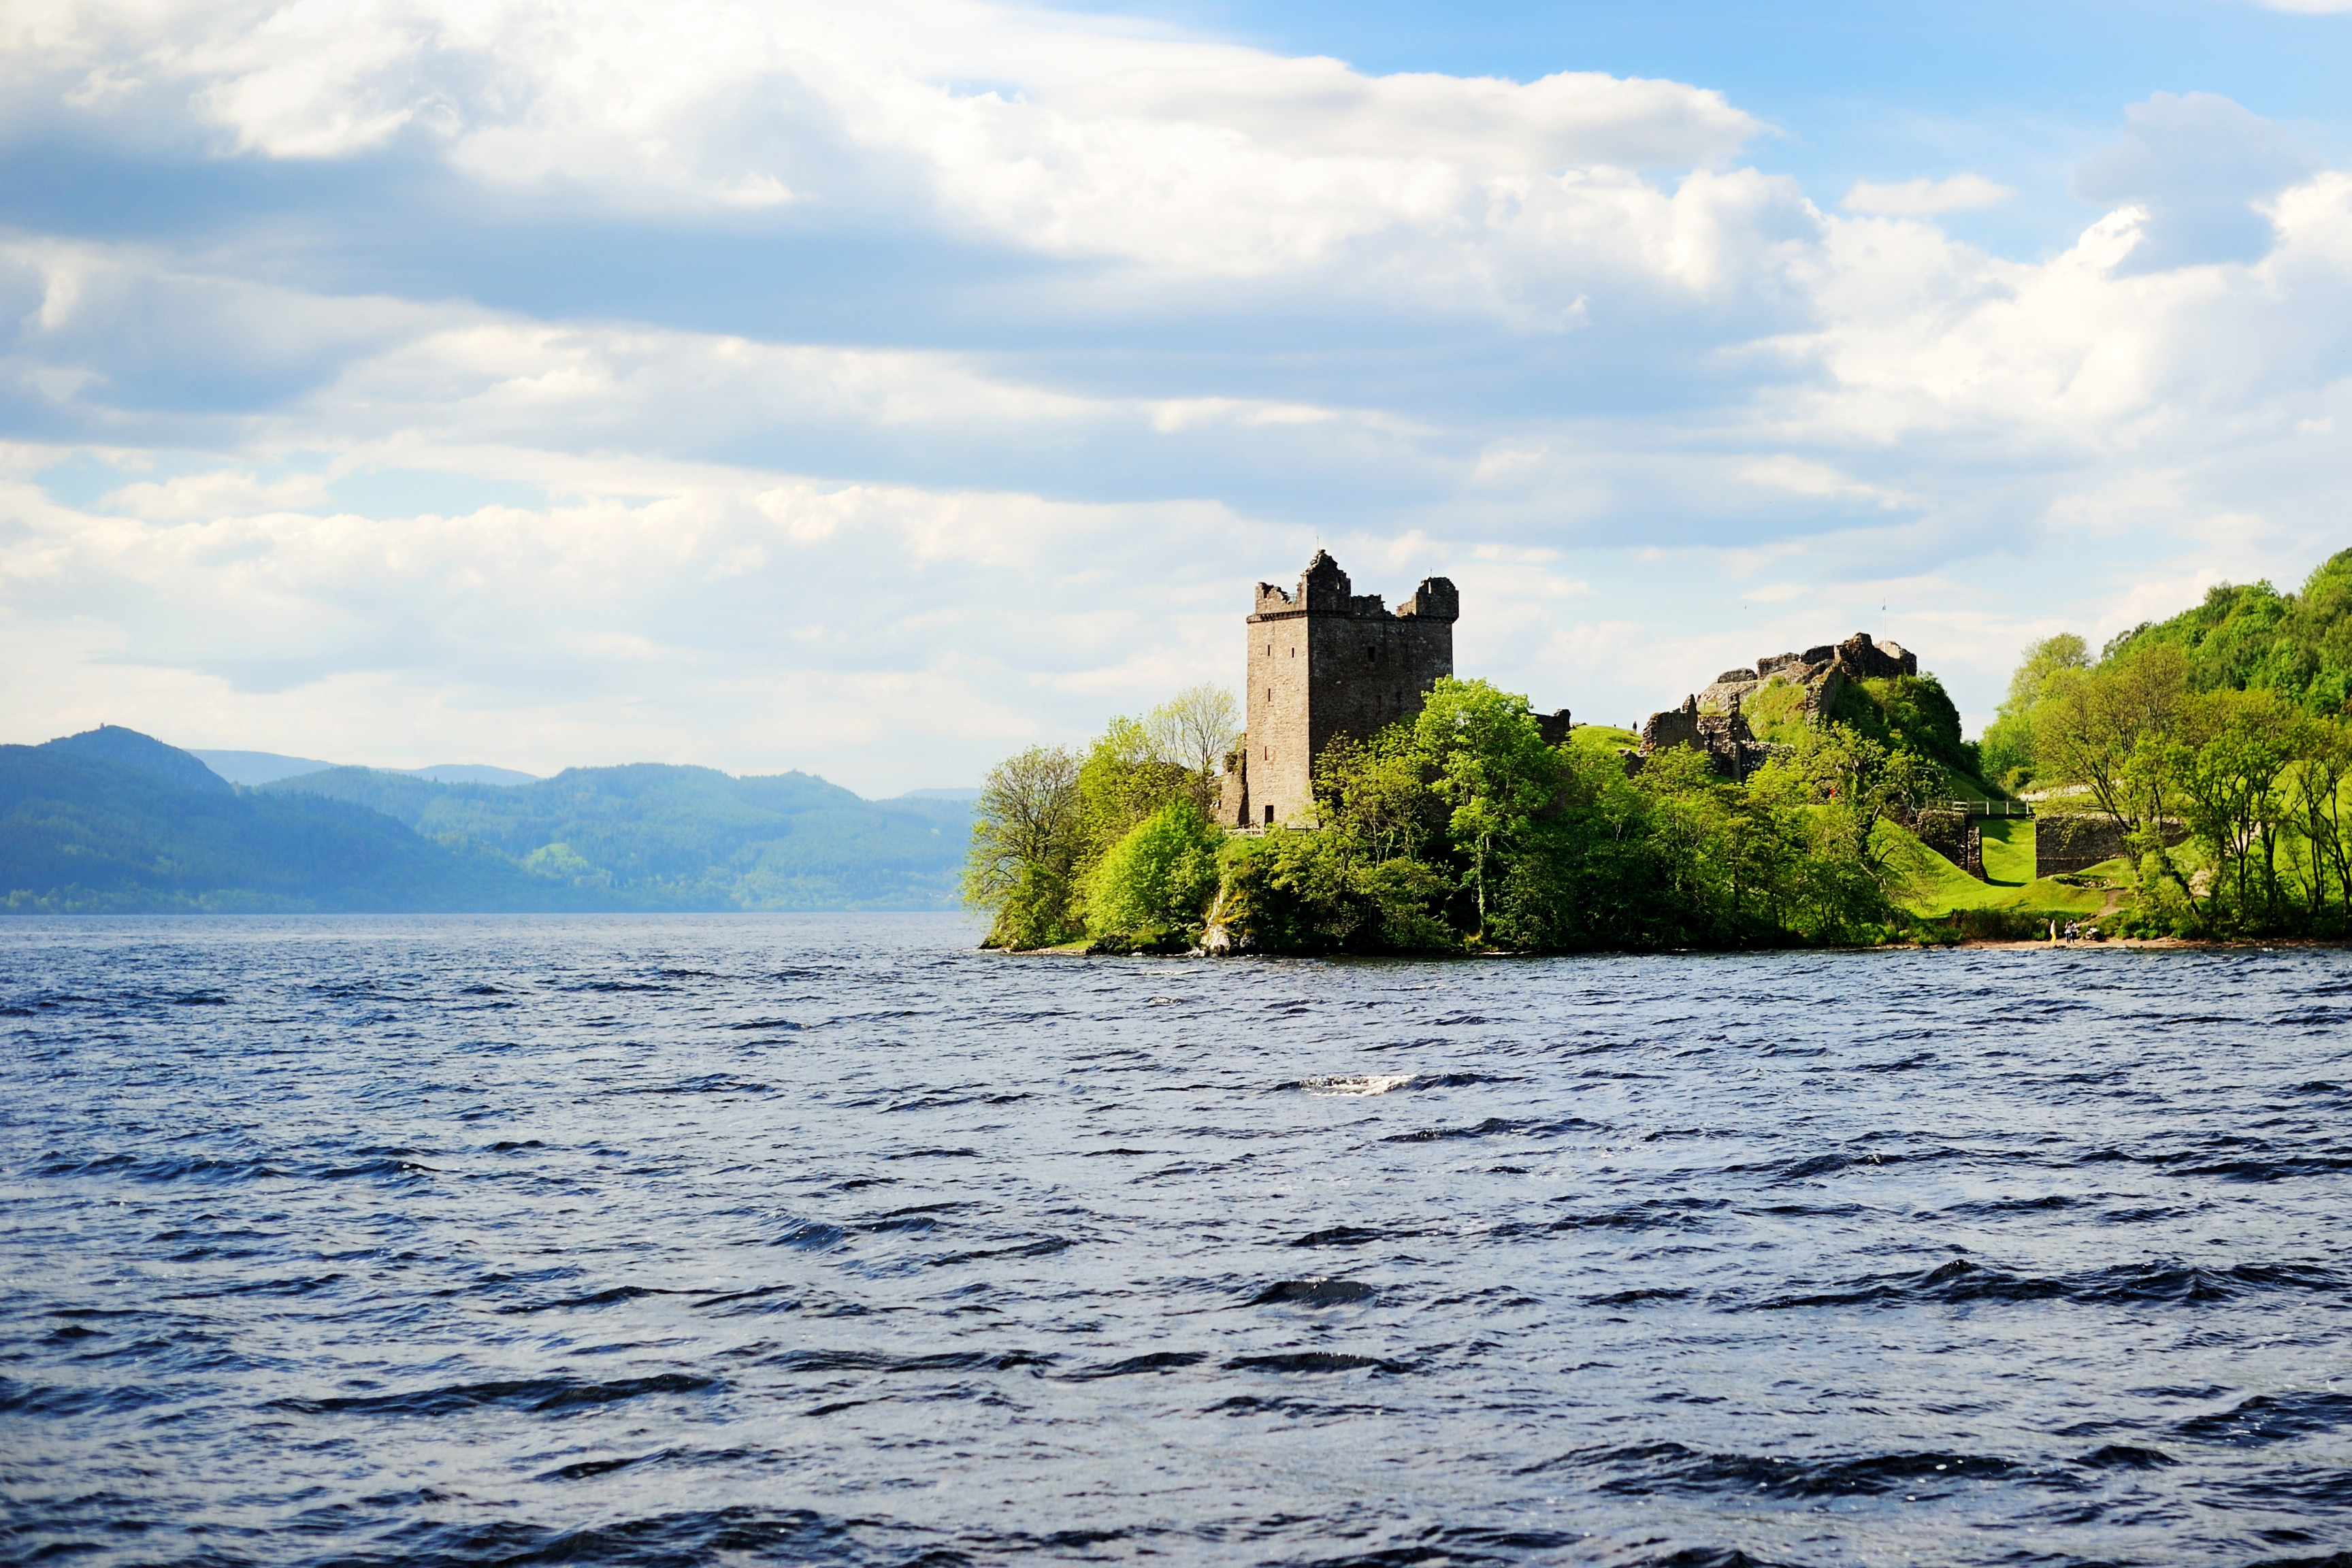 Legend of Loch Ness Monster will be tested with DNA samples